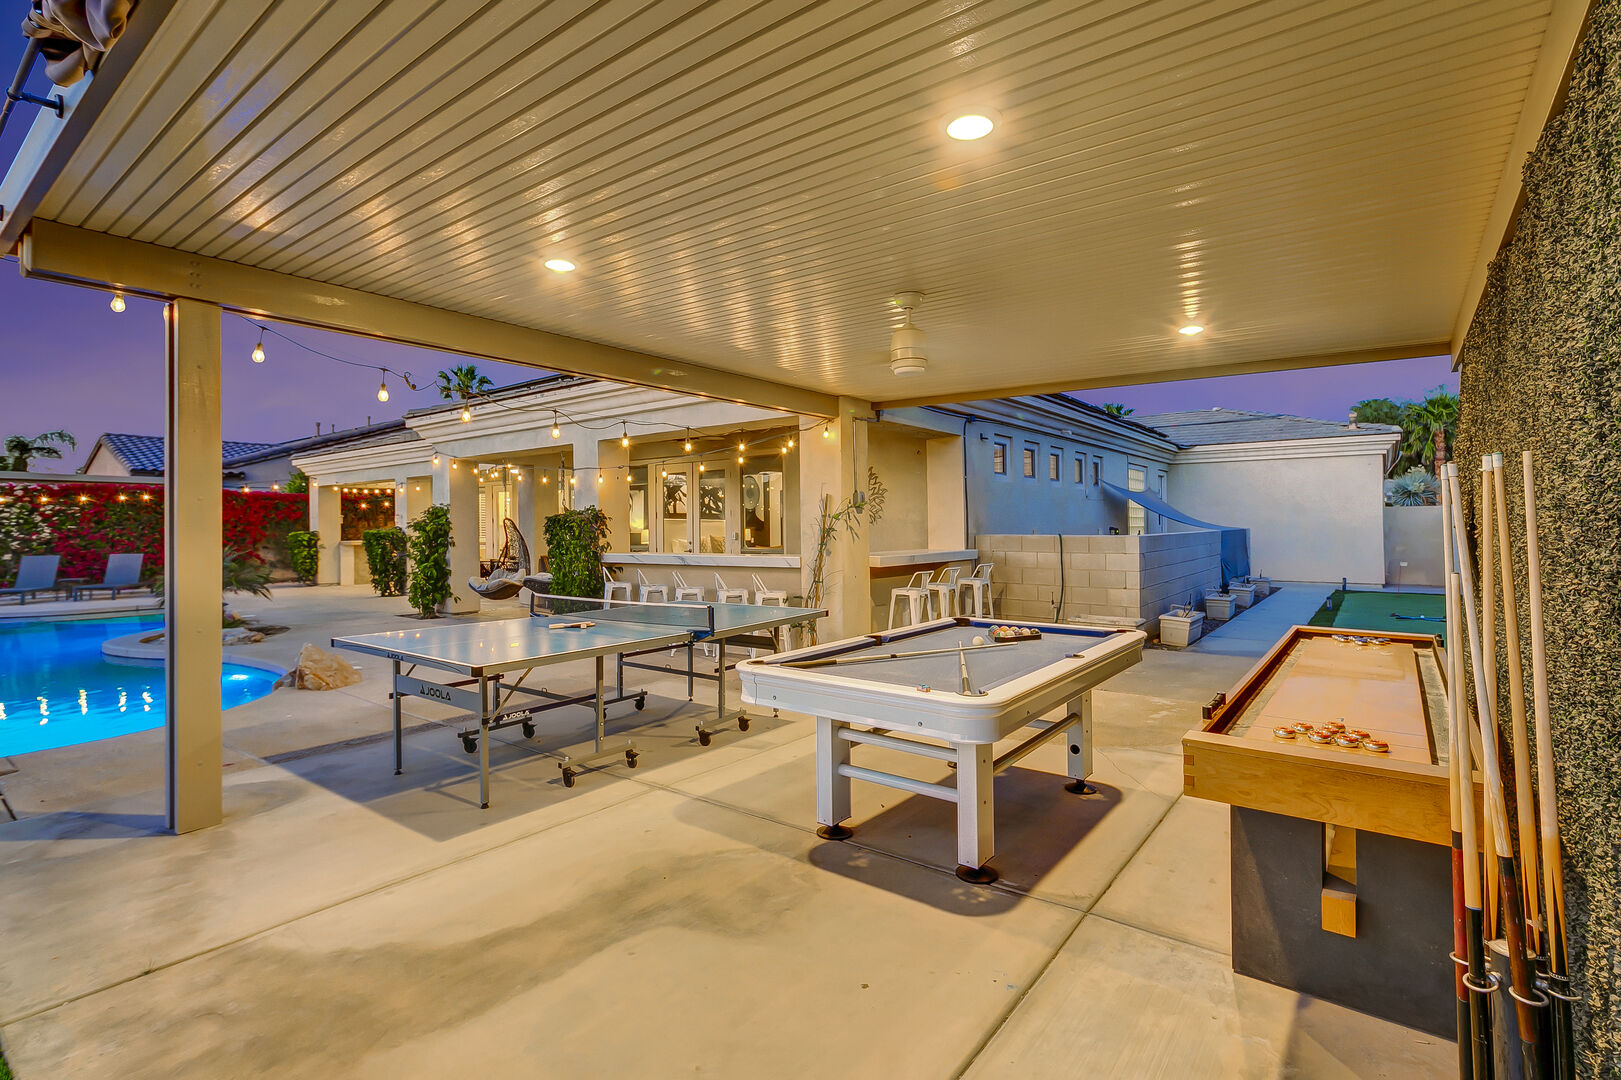 This large, covered game area is a favorite spot for Mirage guests.